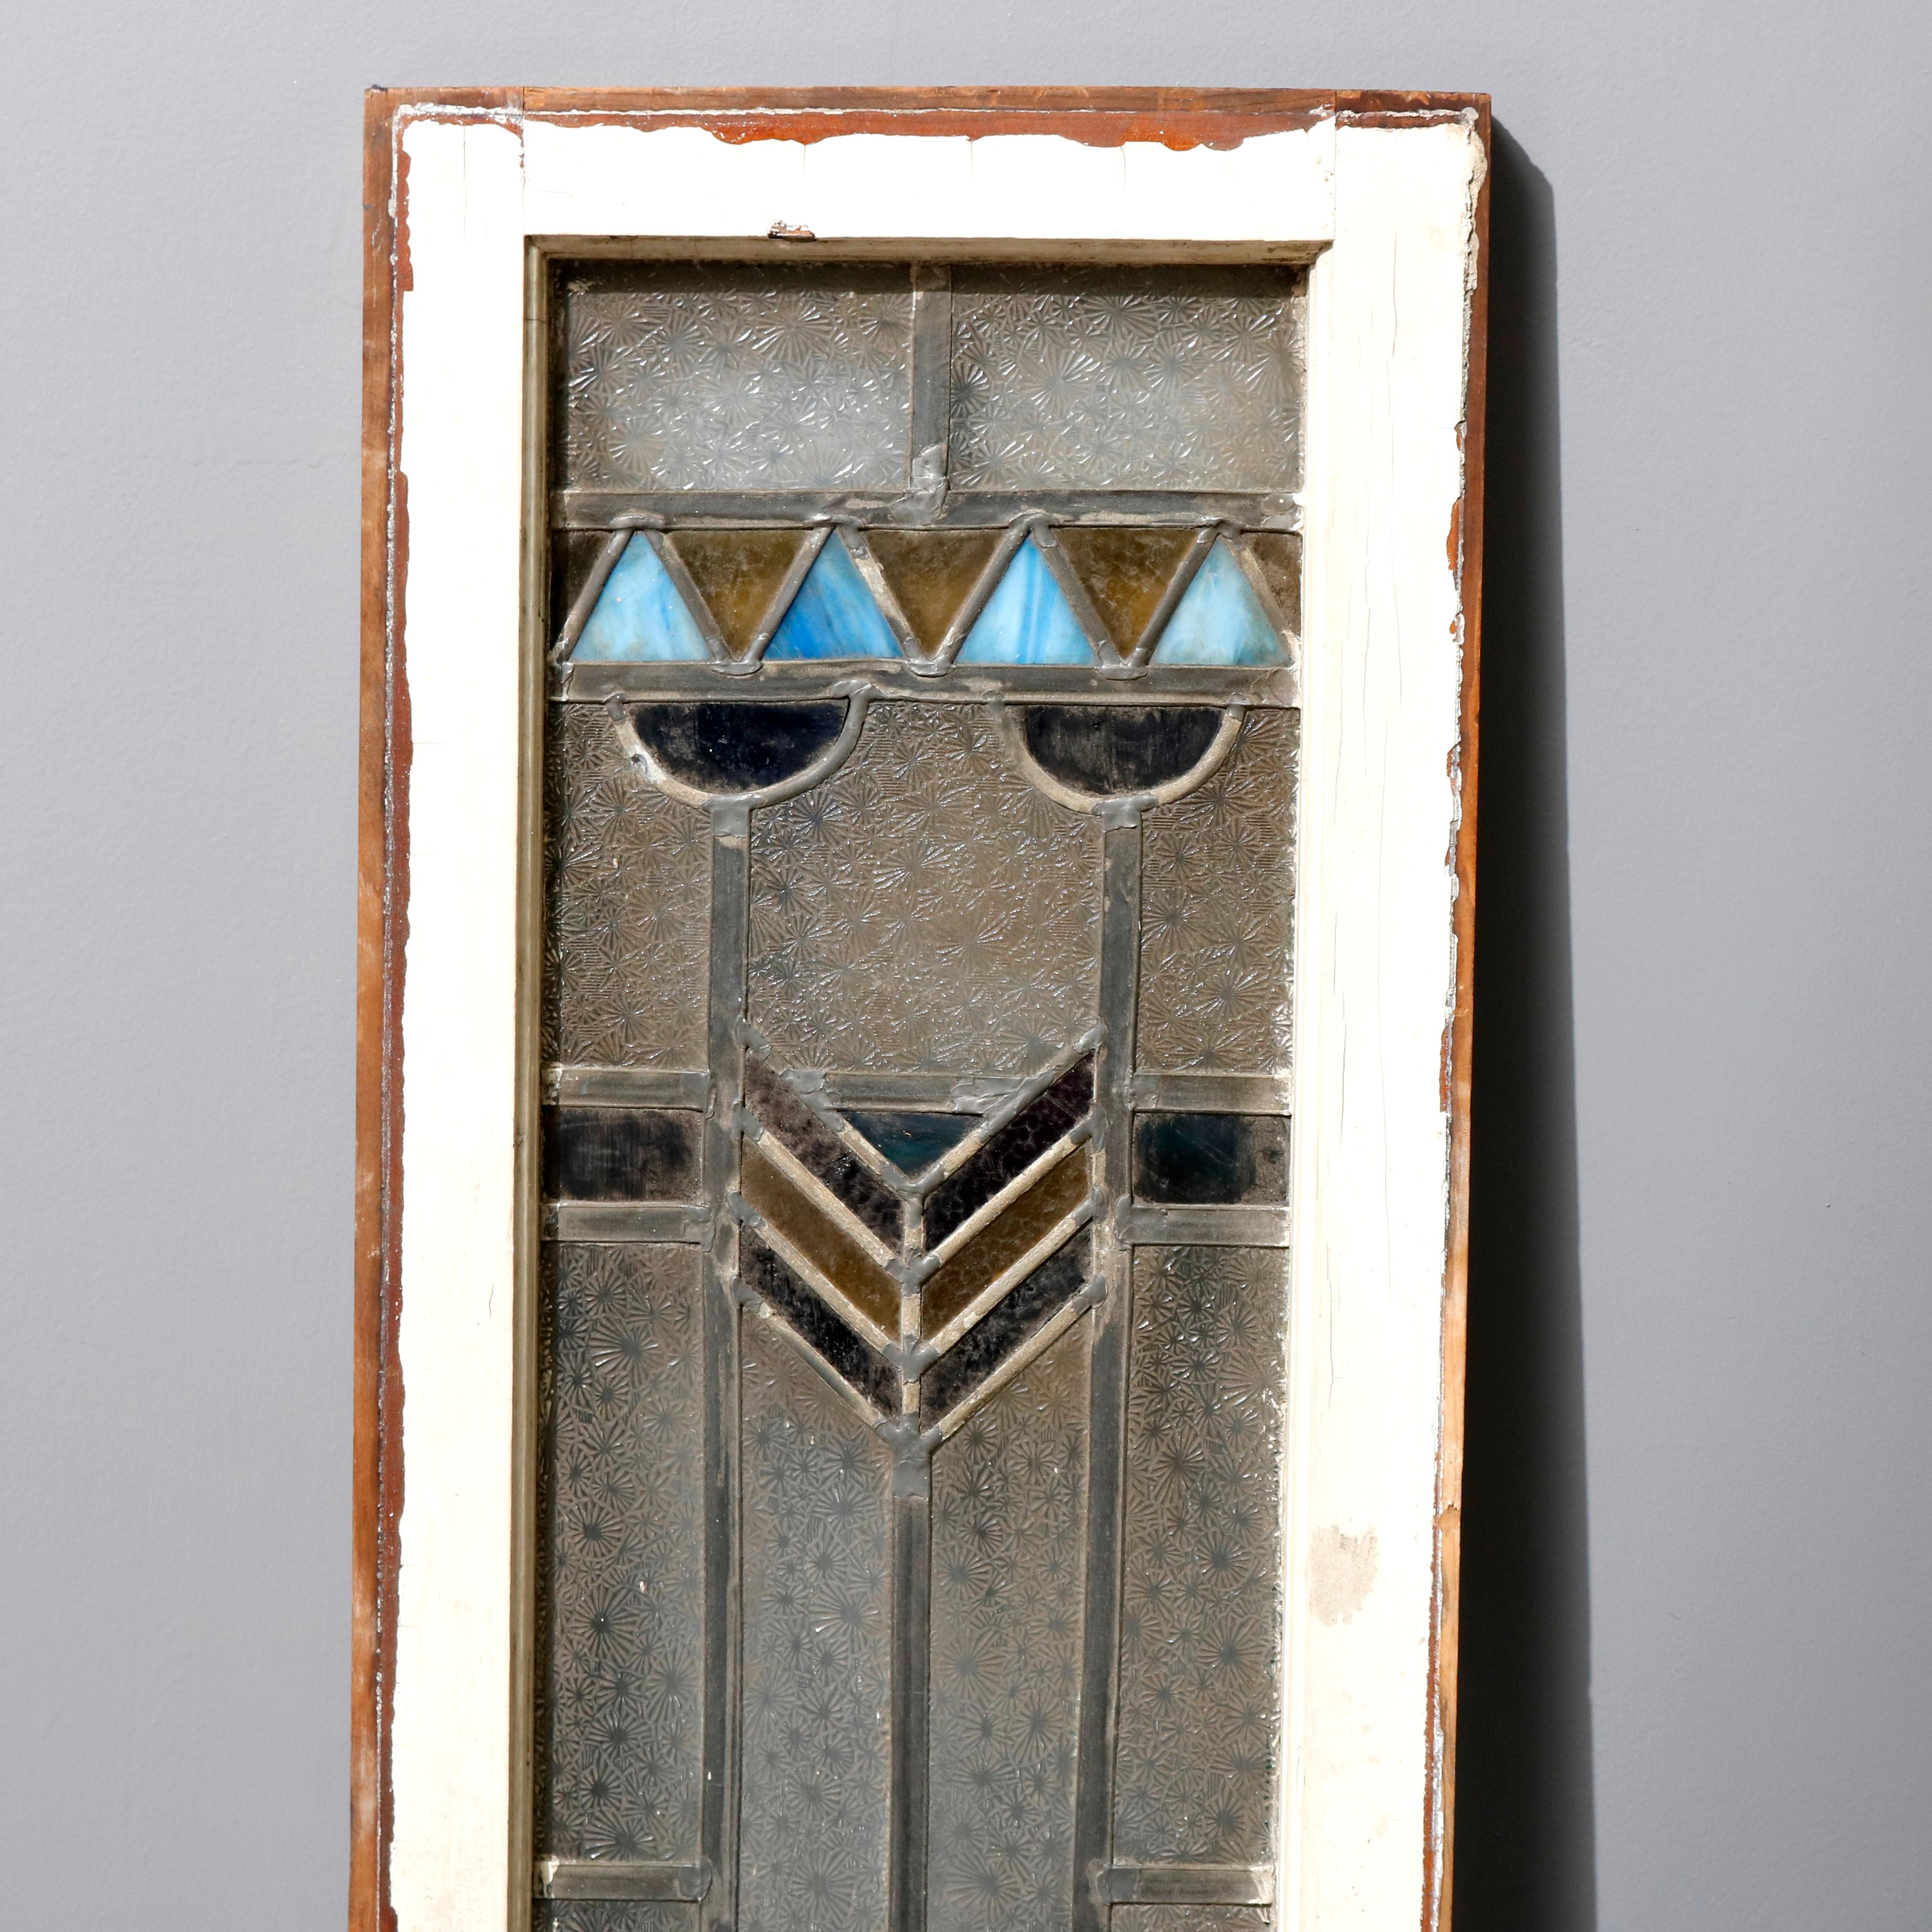 A pair of Arts & Crafts Frank Lloyd Wright style window panels each offers leaded stained glass in geometric form and having central stylized feather and floral patterns, encased in wood window sash, circa 1910

Measures: 54